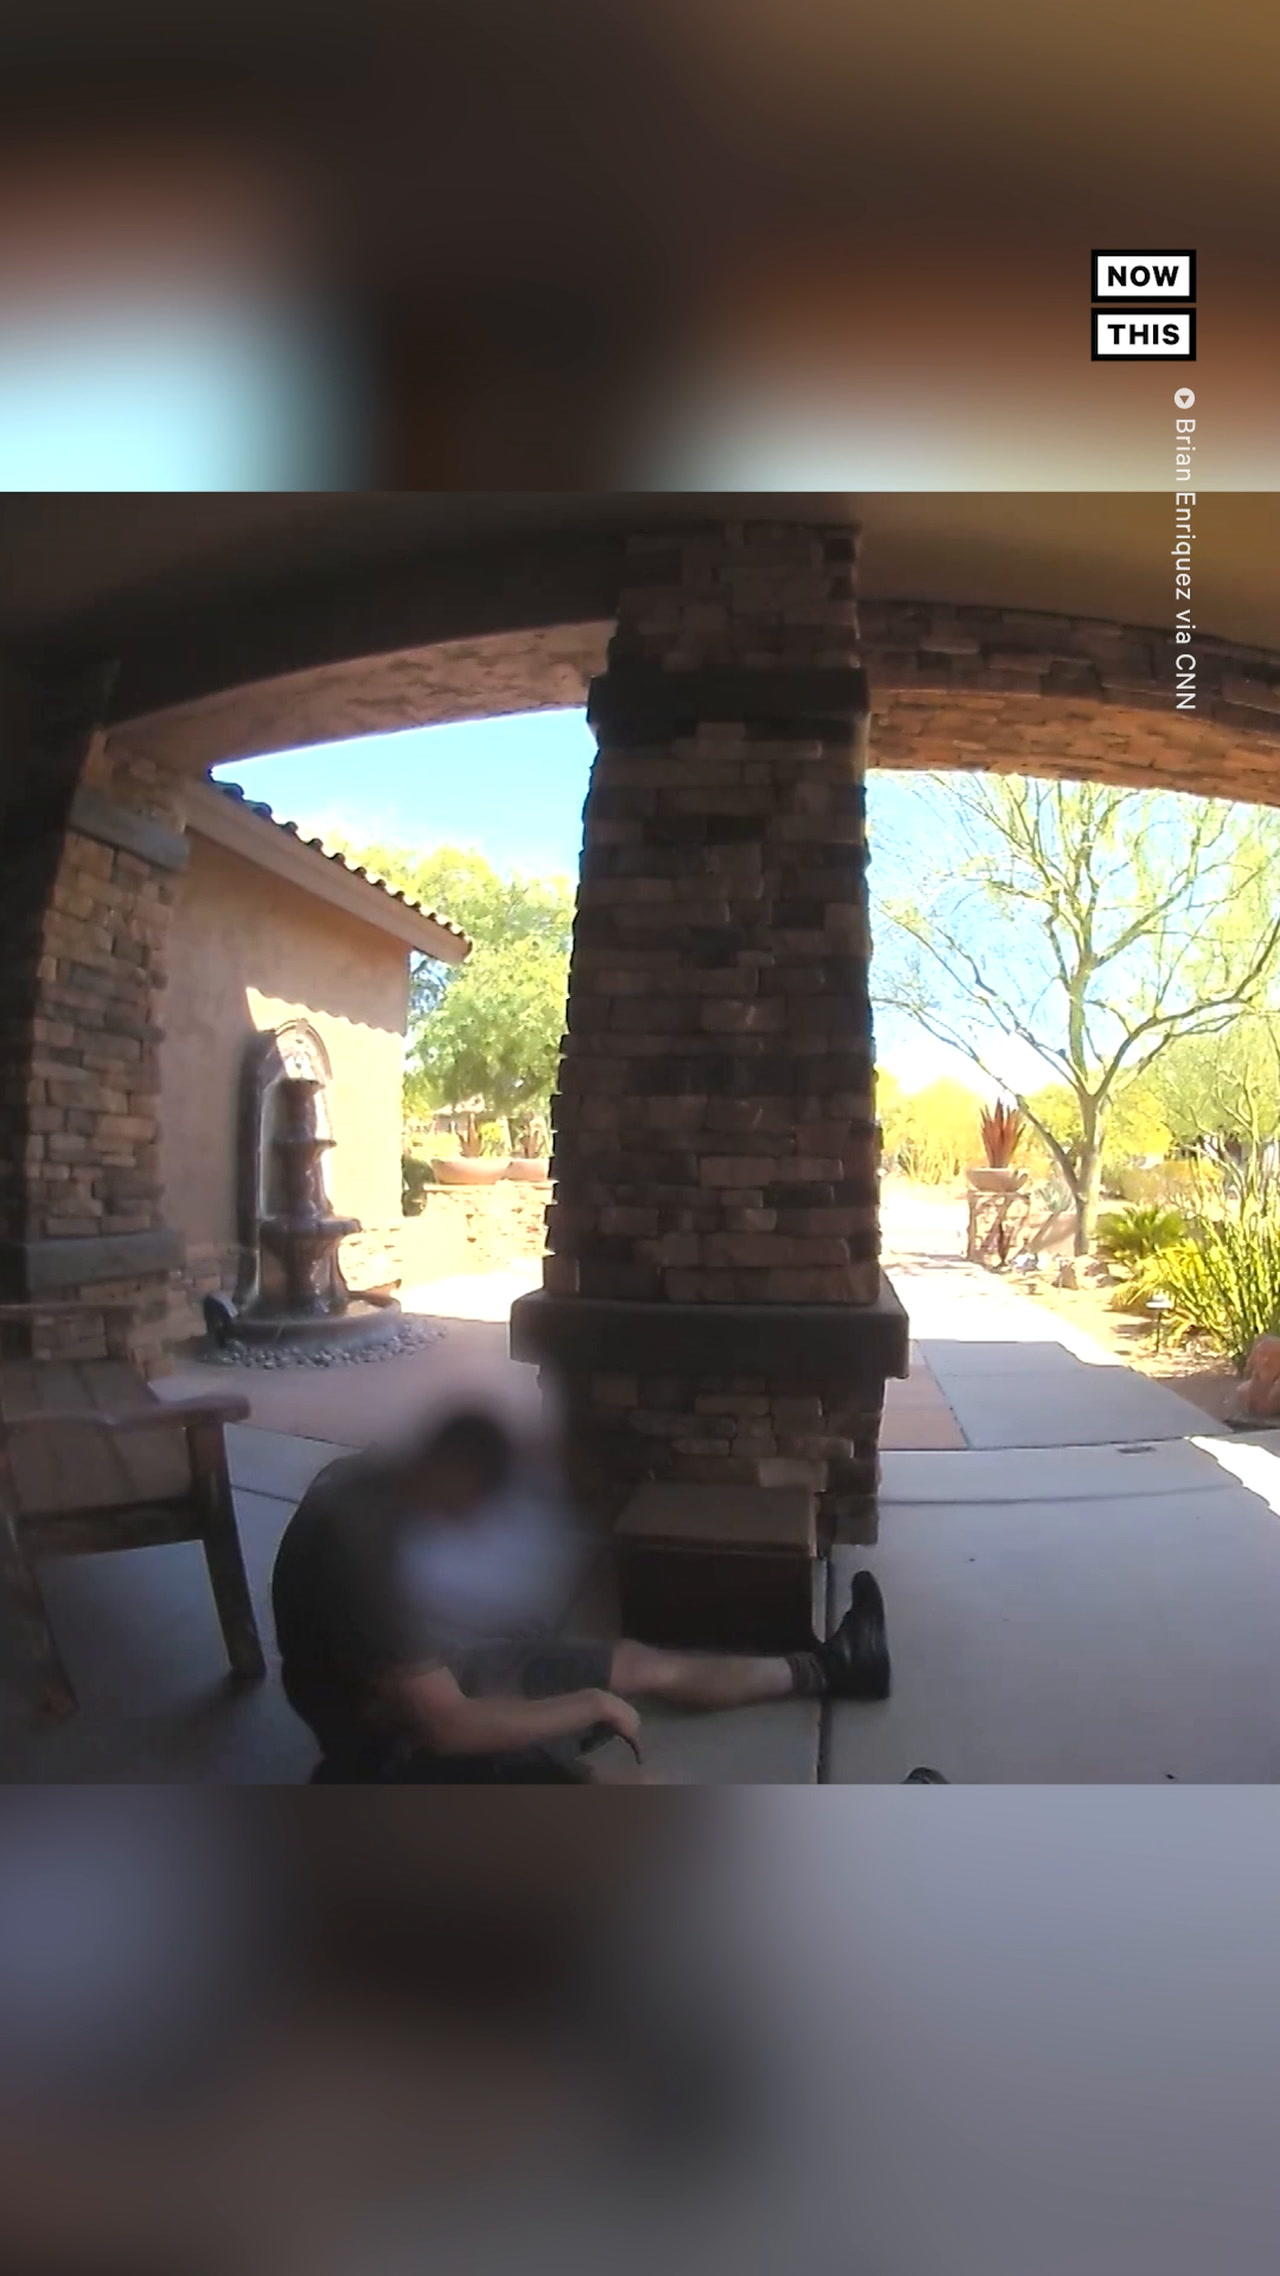 Doorbell Cam Captures UPS Driver Collapsing Due to Extreme Heat